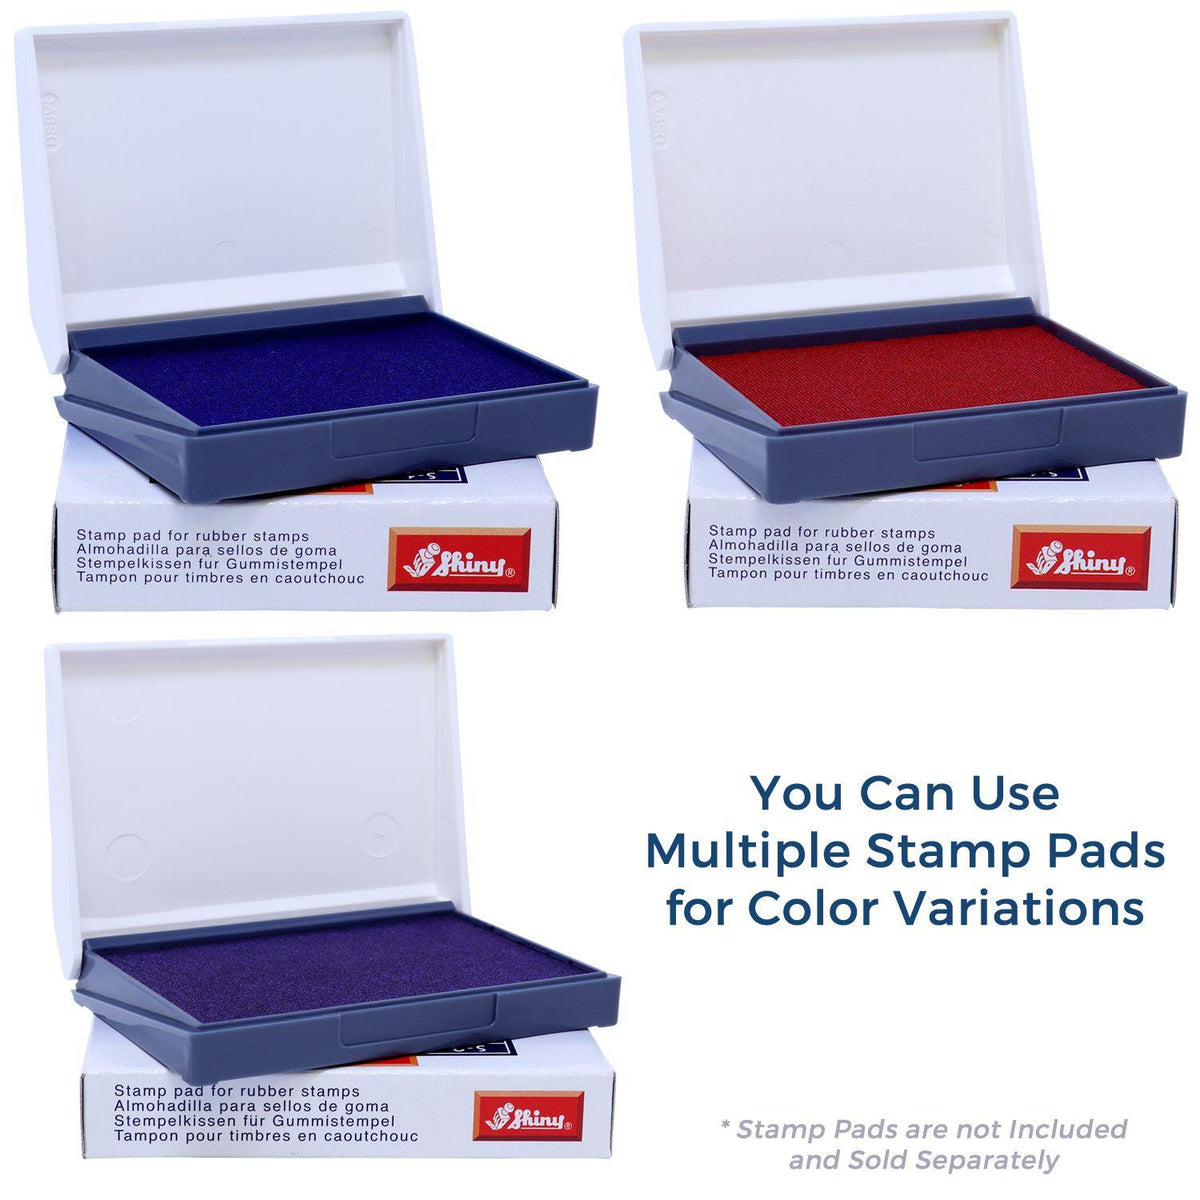 Stamp Pads for Large Expedite Rubber Stamp Available